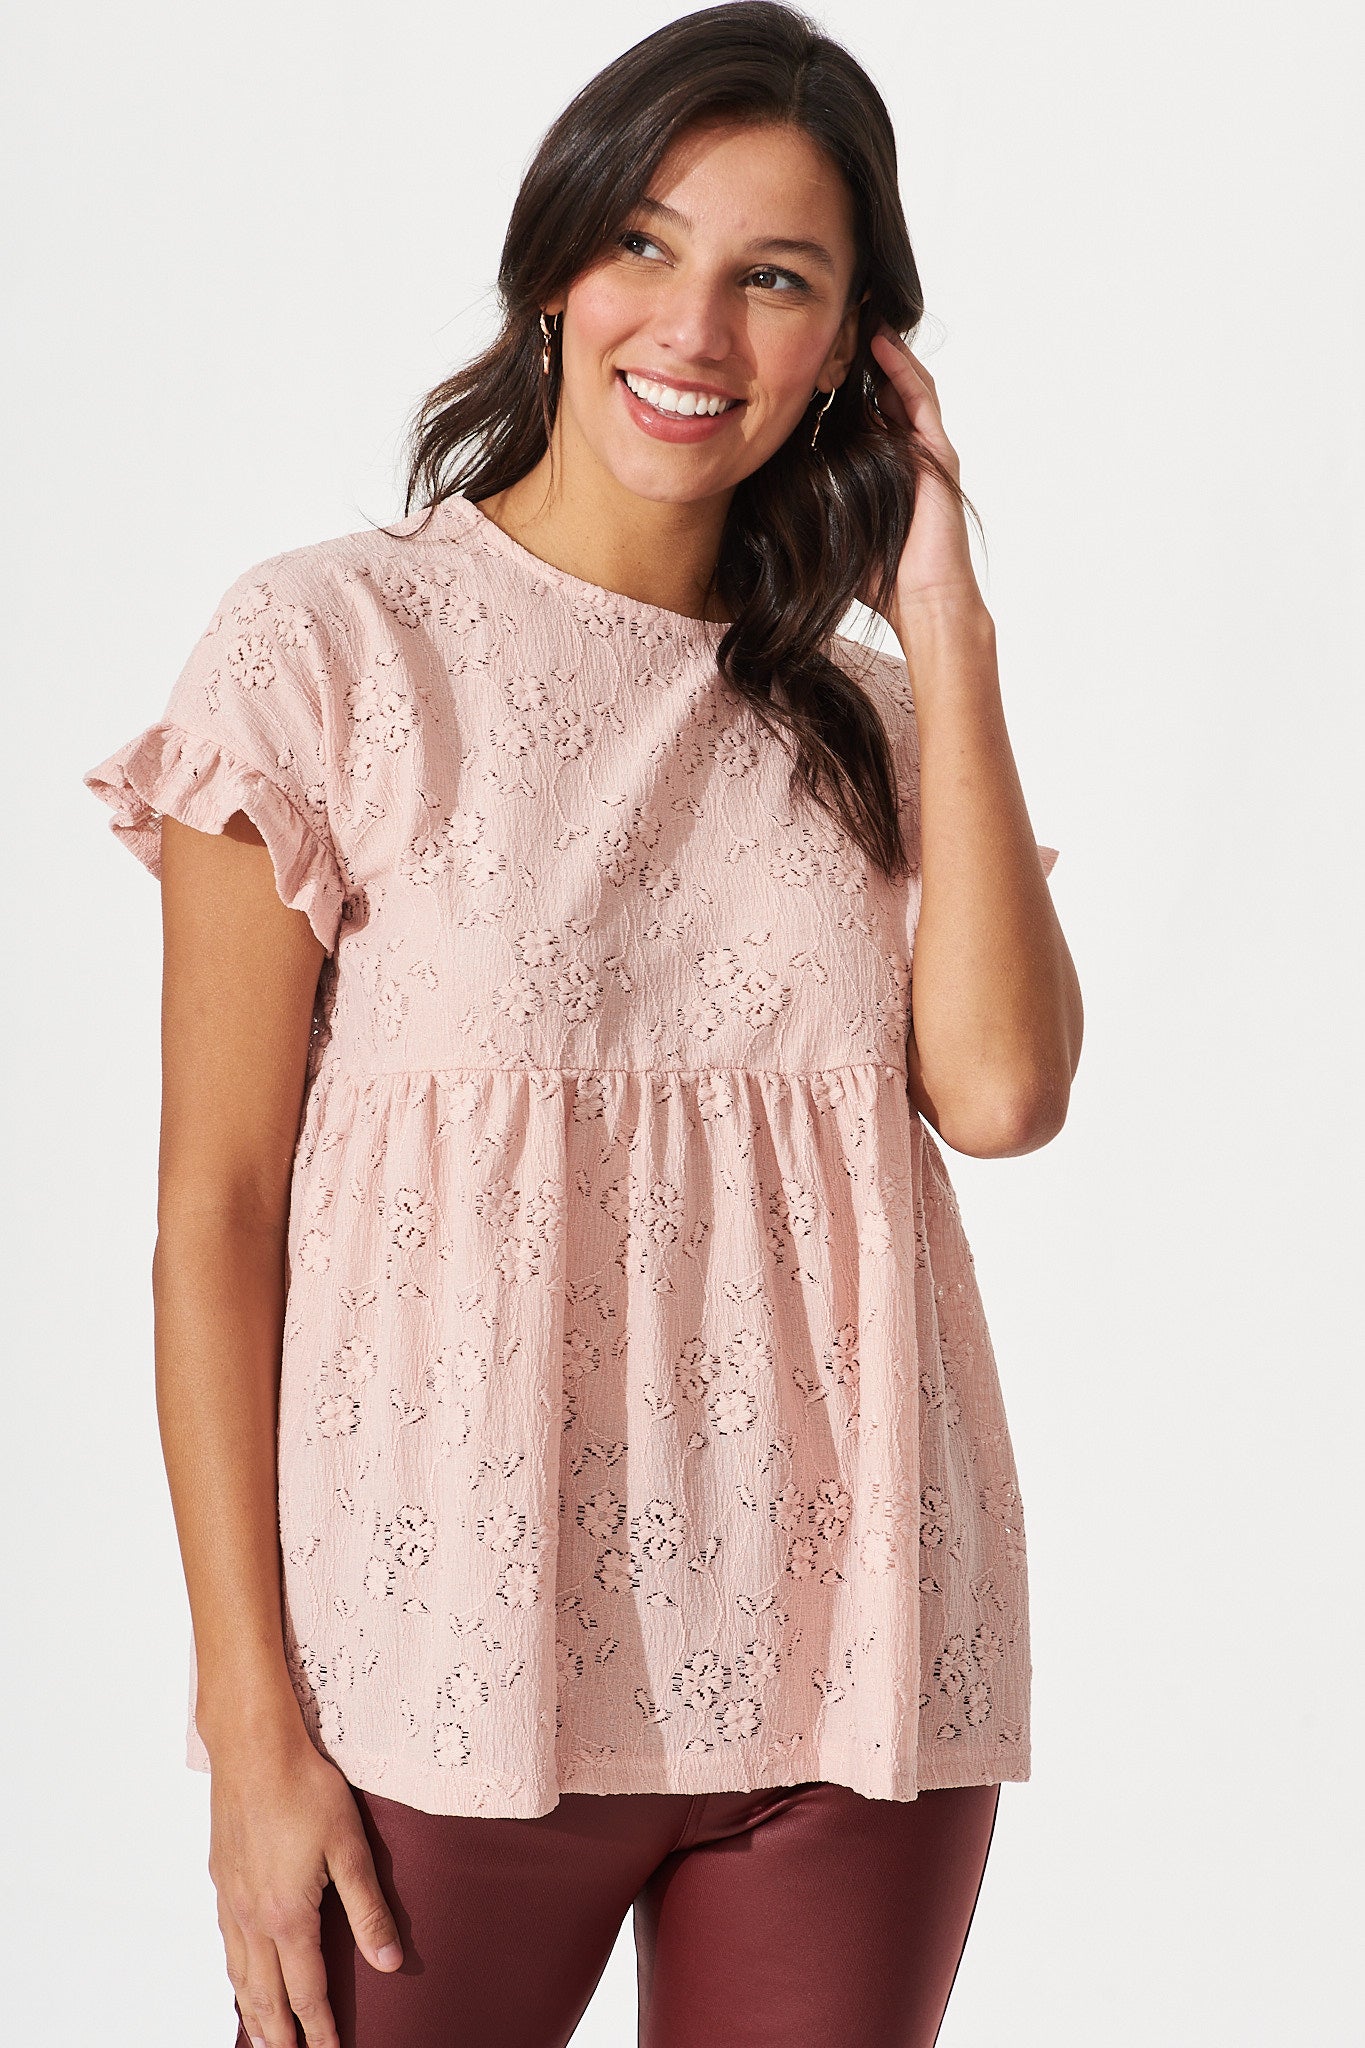 Ferrah Smock Top In Blush Lace - front